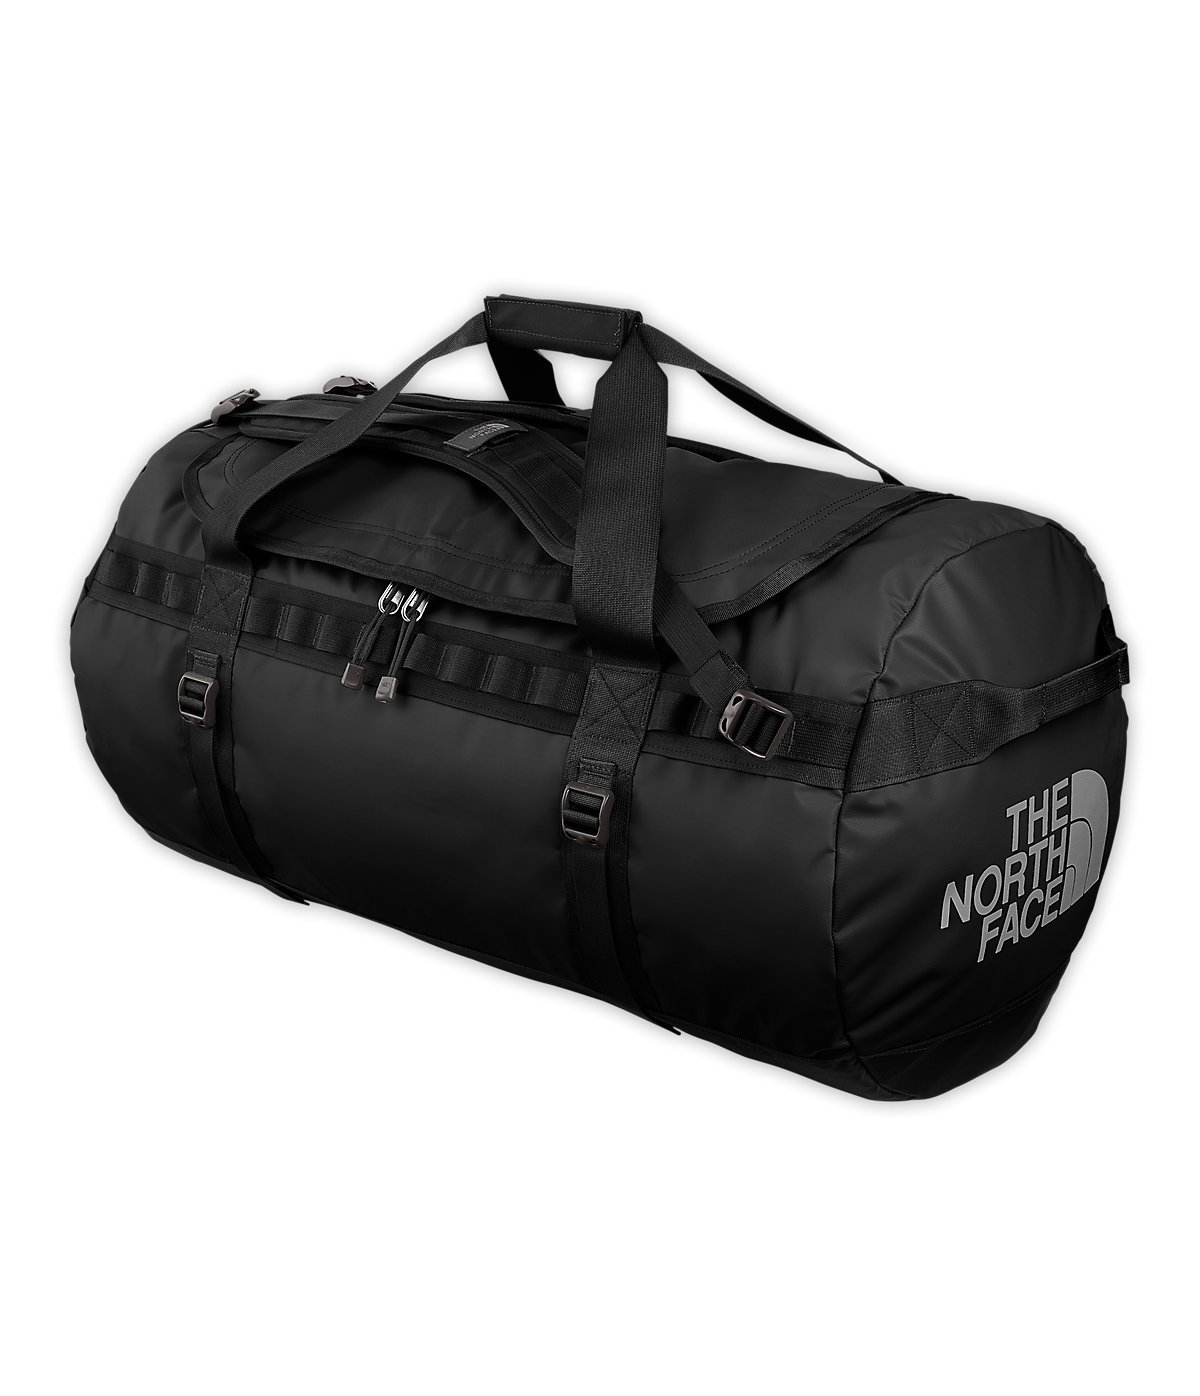 The North Face - BC Duffel Large 90 litres - The North Face : Equipment